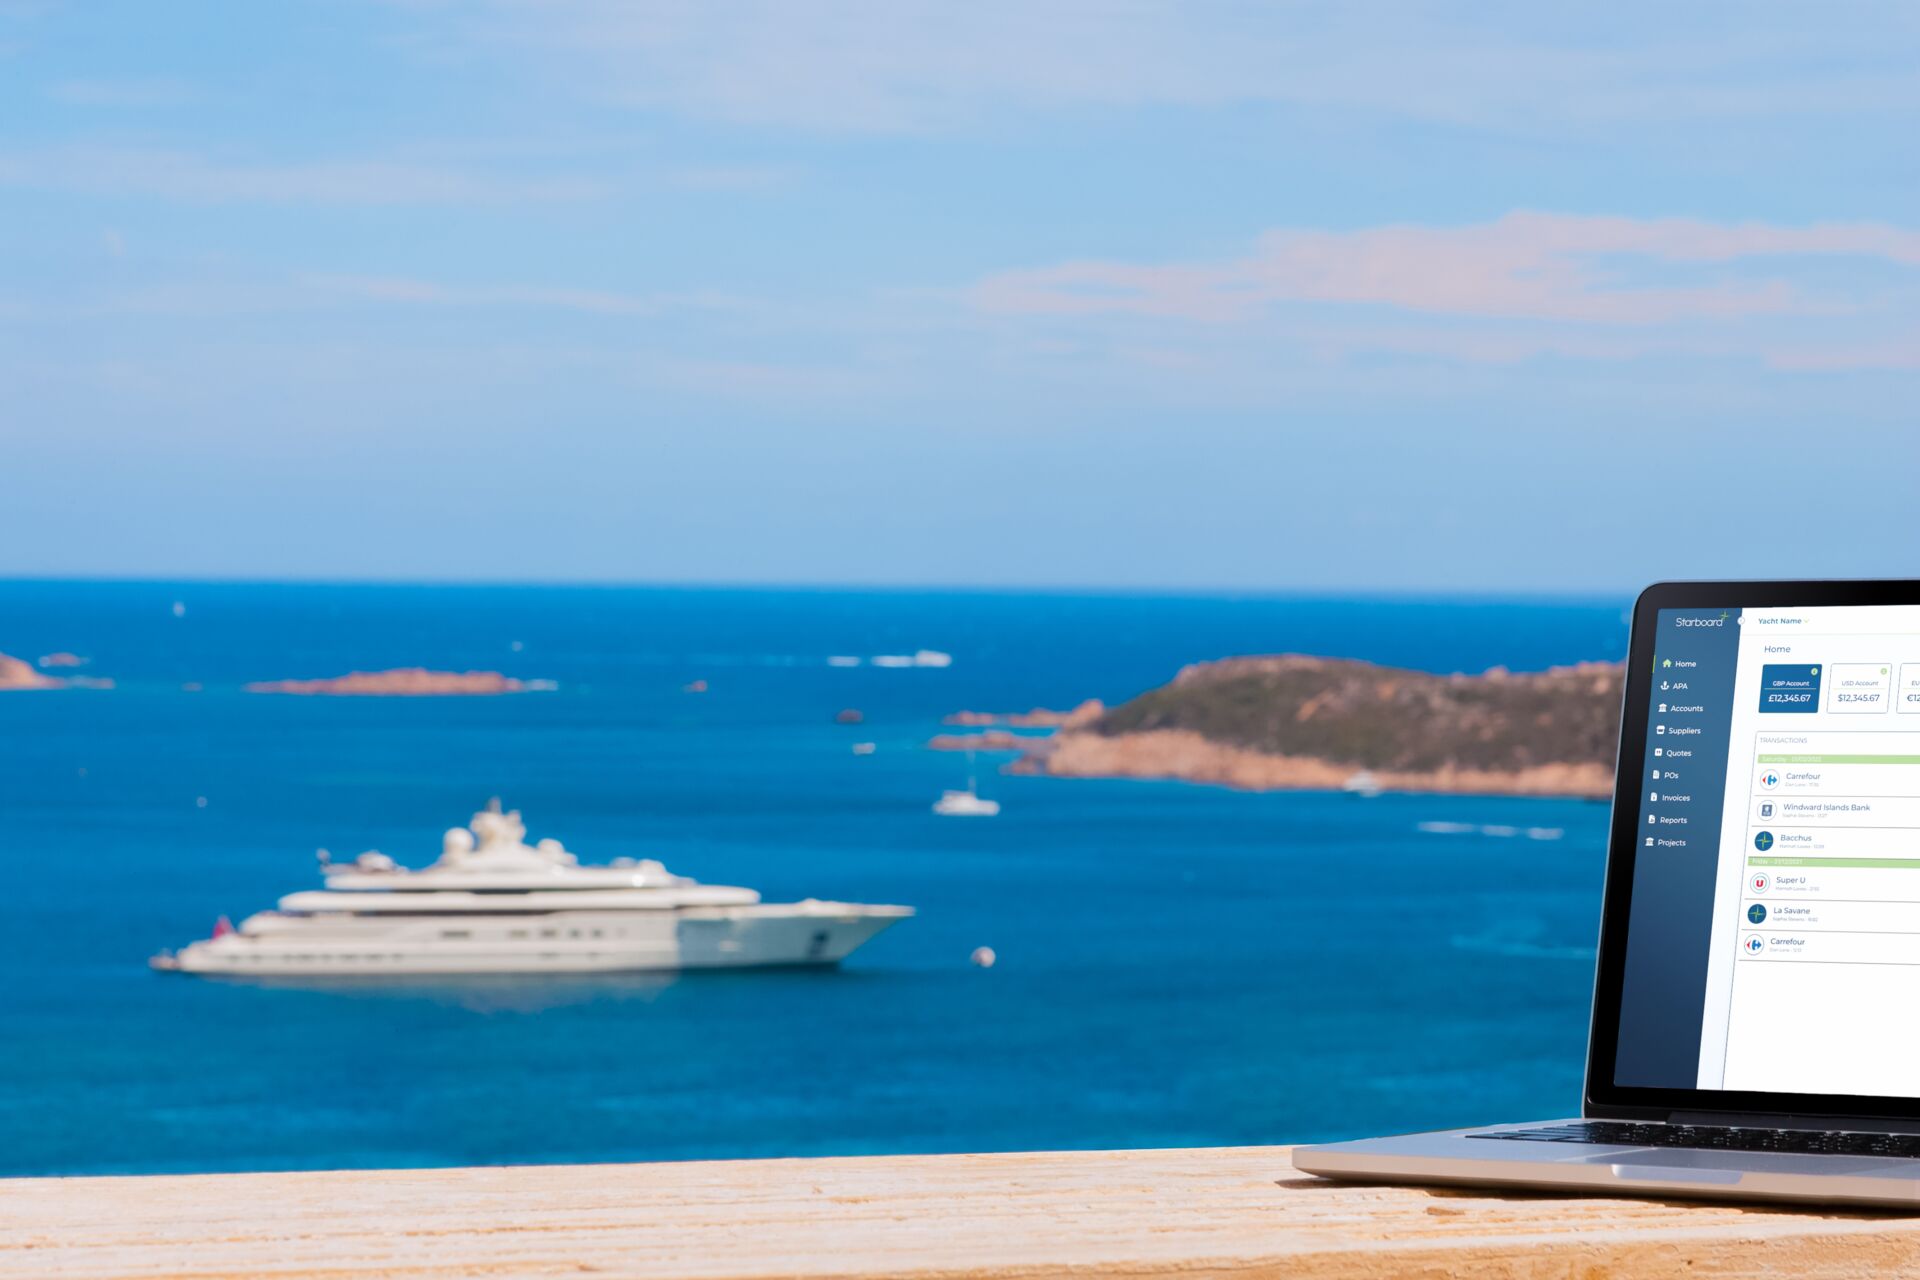 A superyacht cruising with a laptop shown in the image displaying the Starboard Card platform